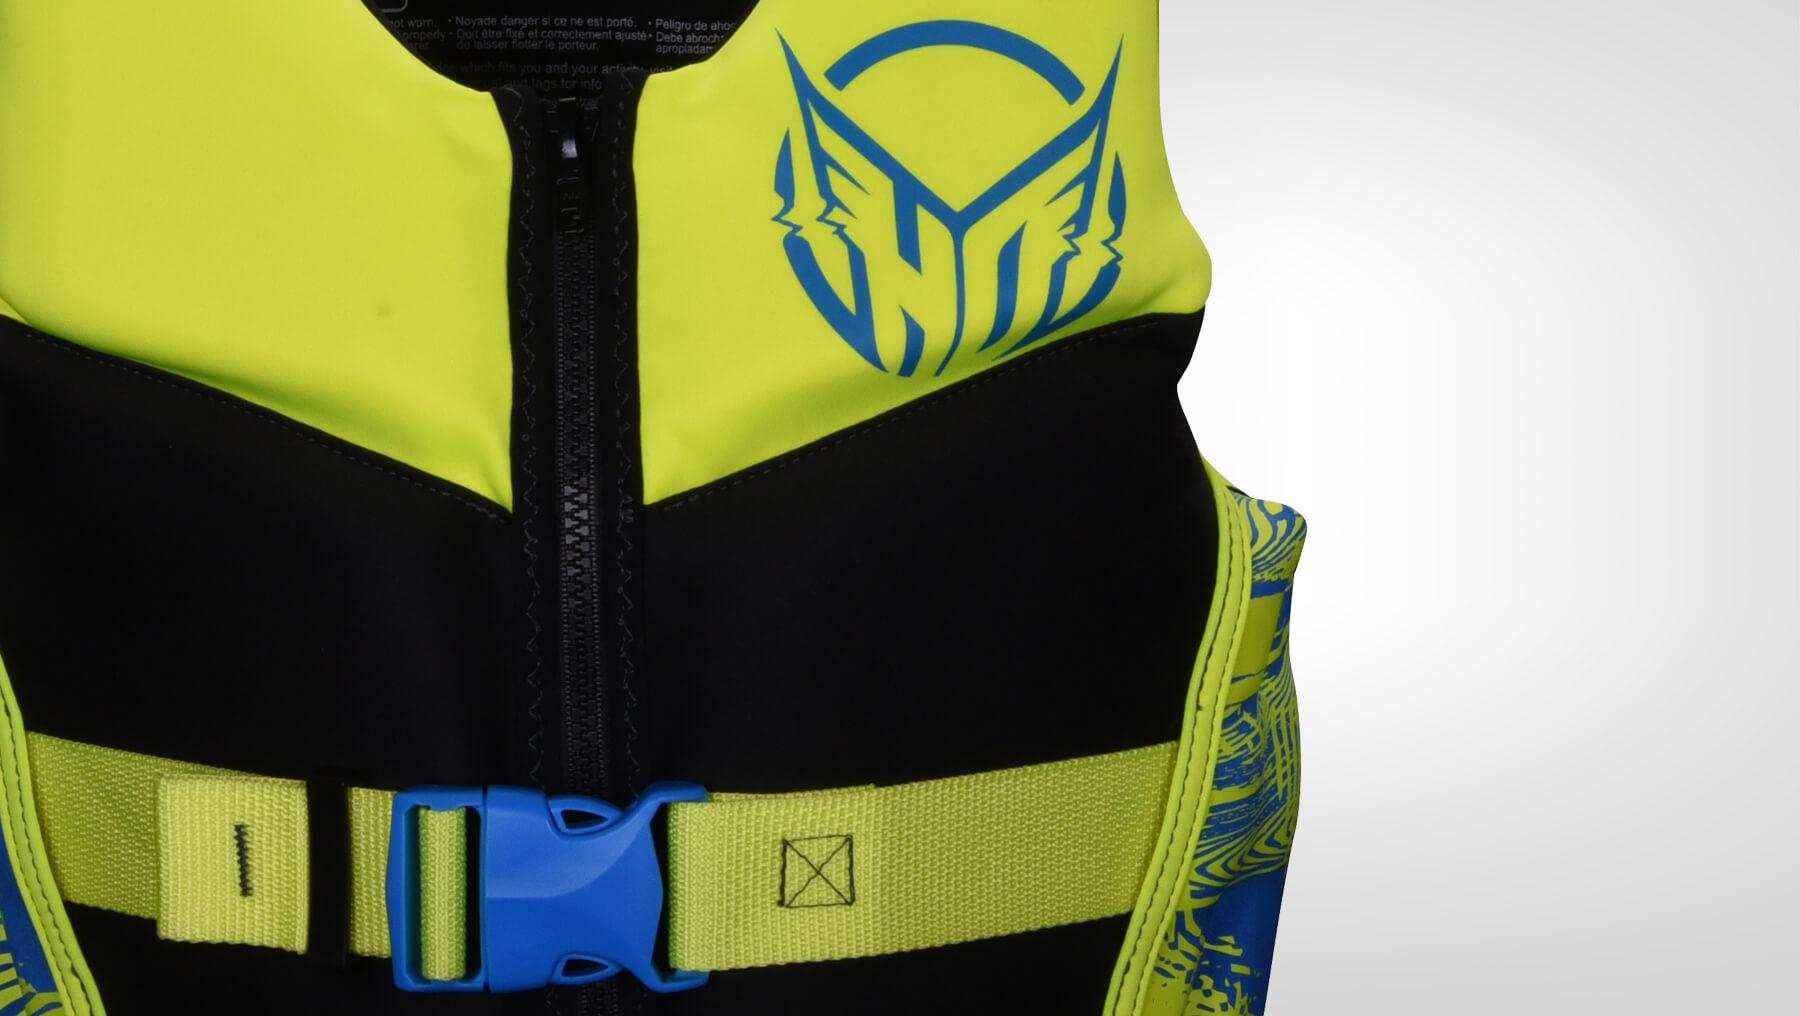 HO Youth Pursuit CGA Kids Wakeboard Vest